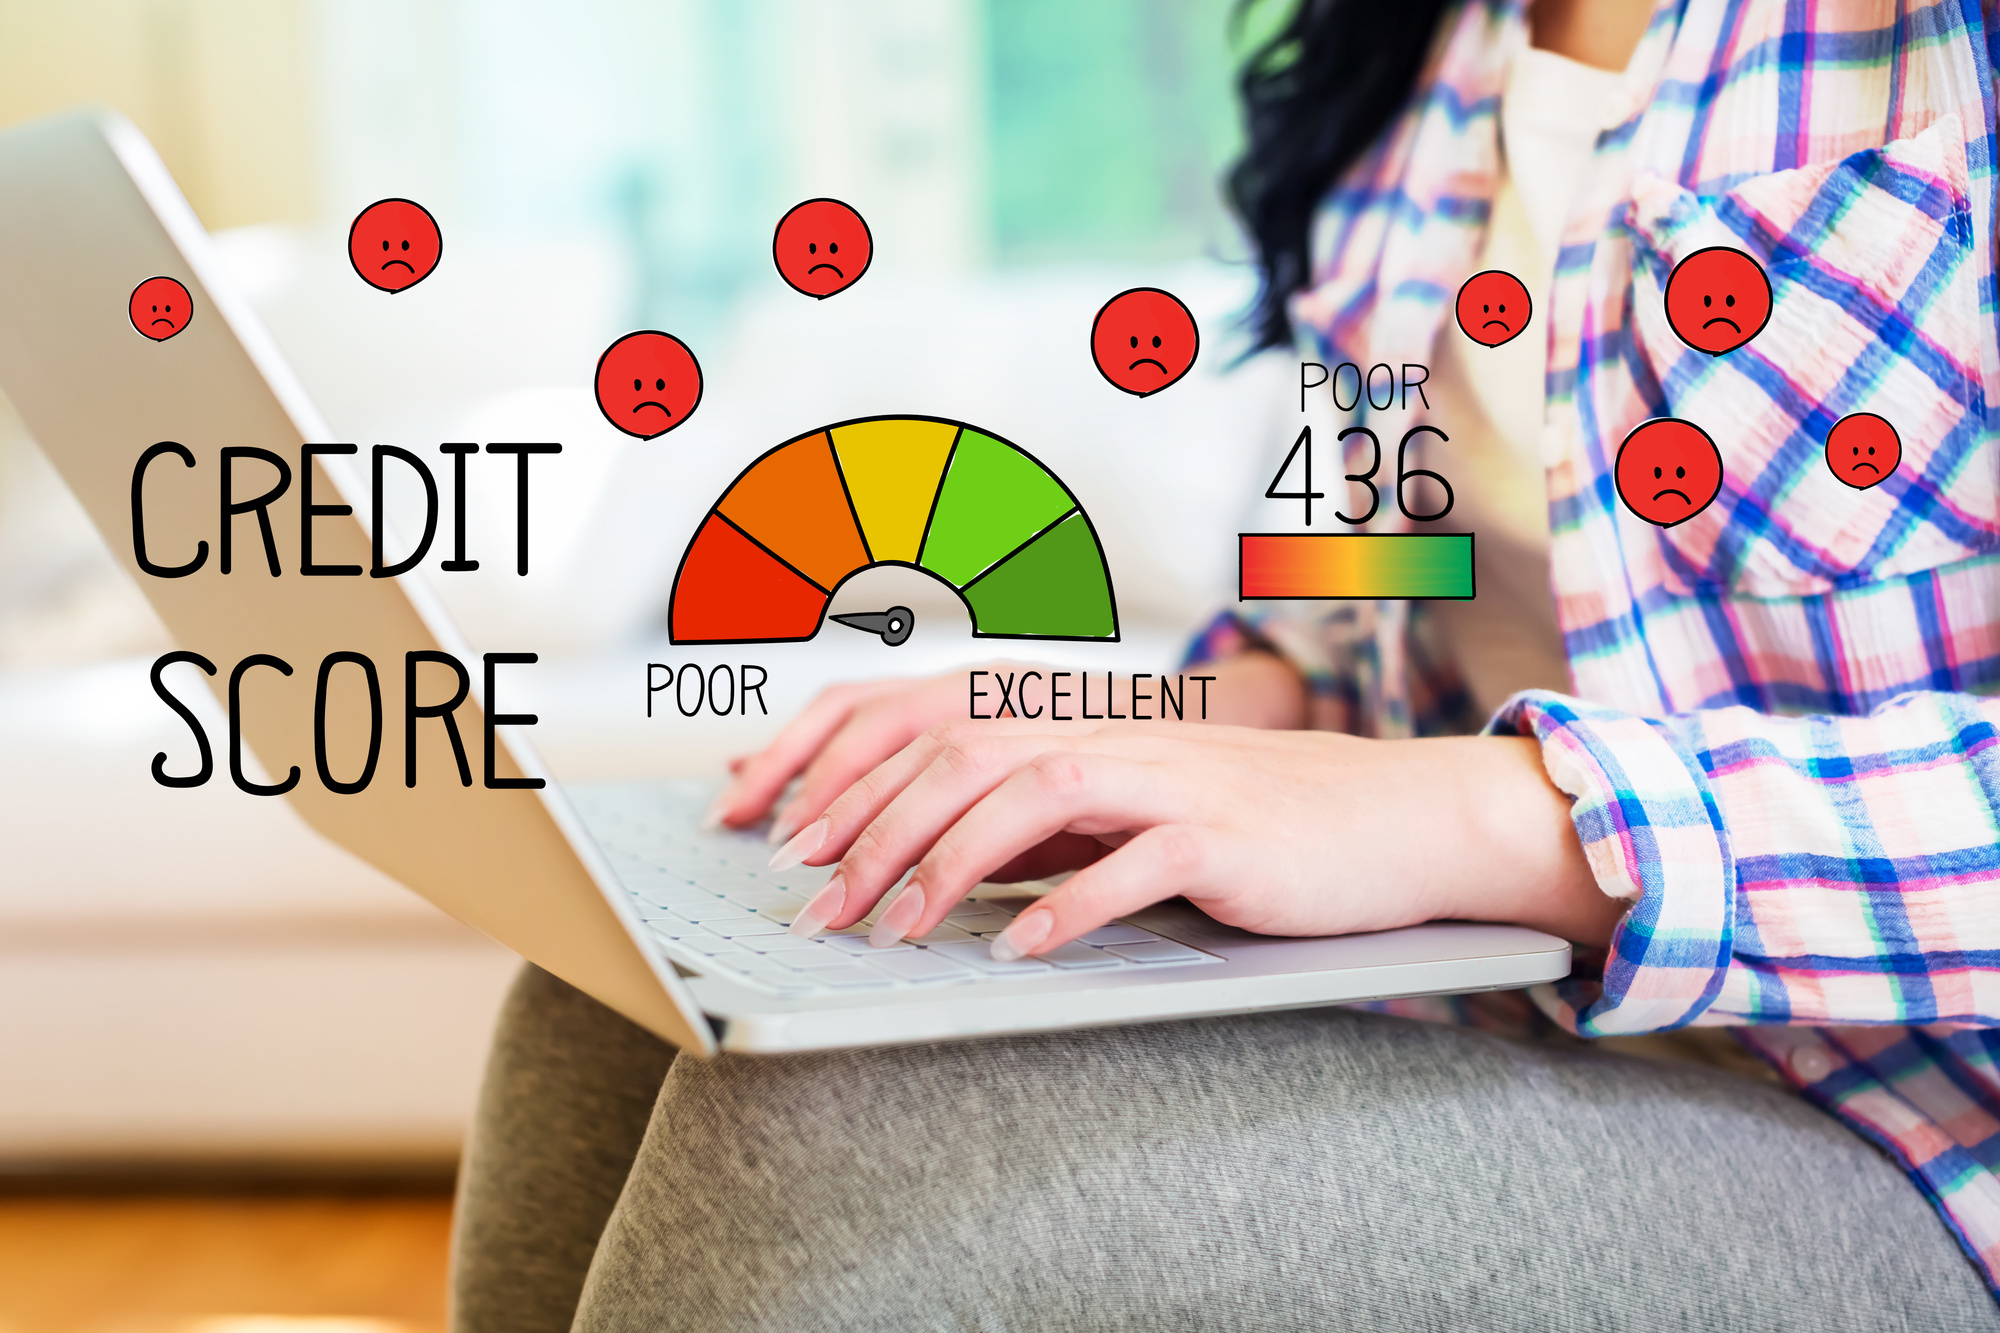 Have you ever asked yourself the question: why did my credit score drop? Read on to learn more about the possible reasons why this has happened.